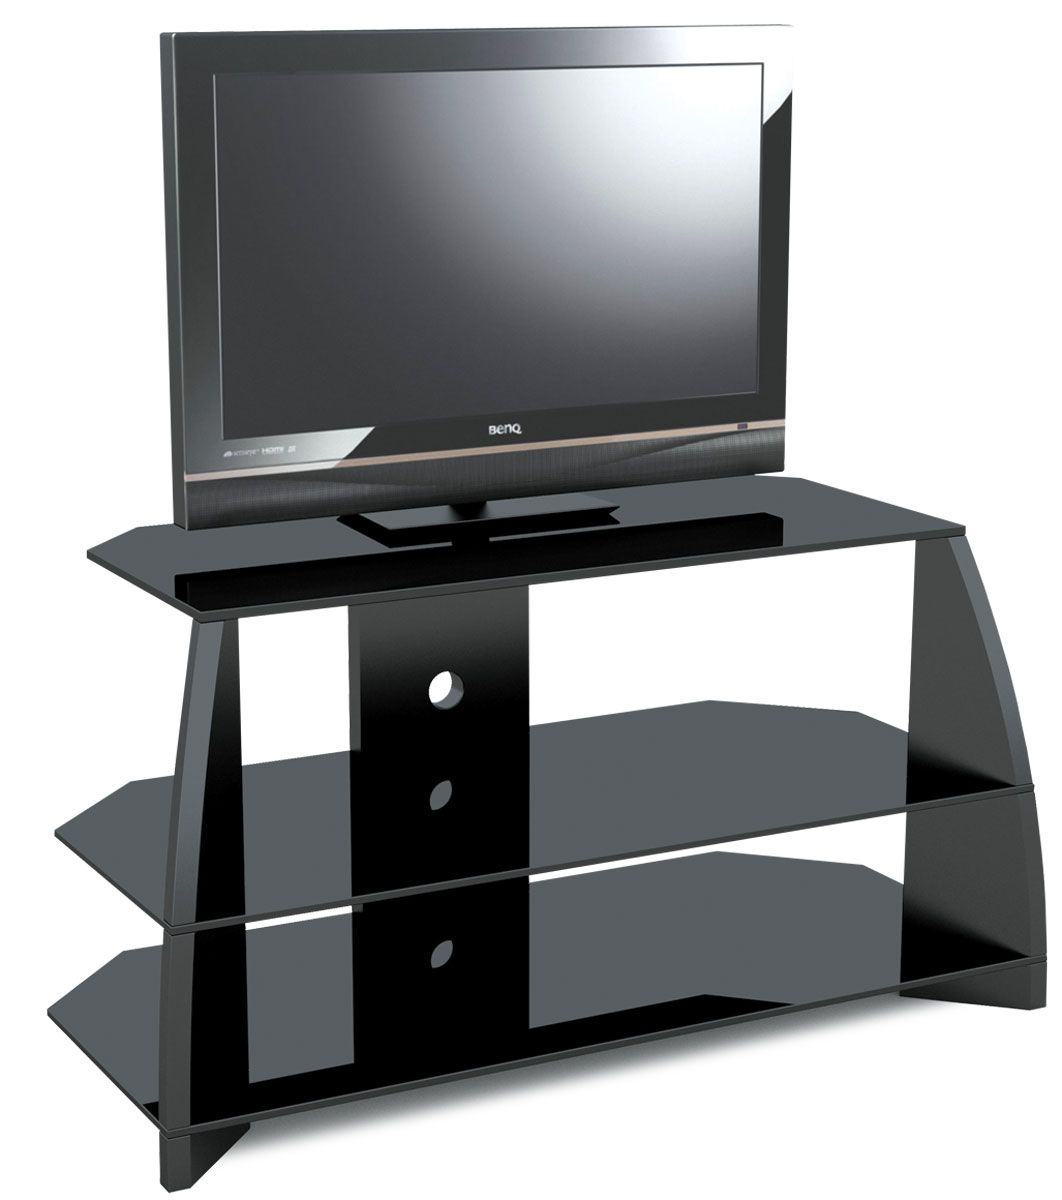 Stil Stand Stuk2045bl High Gloss Black Corner Tv For Up To Inside Elevated Tv Stands (View 4 of 15)